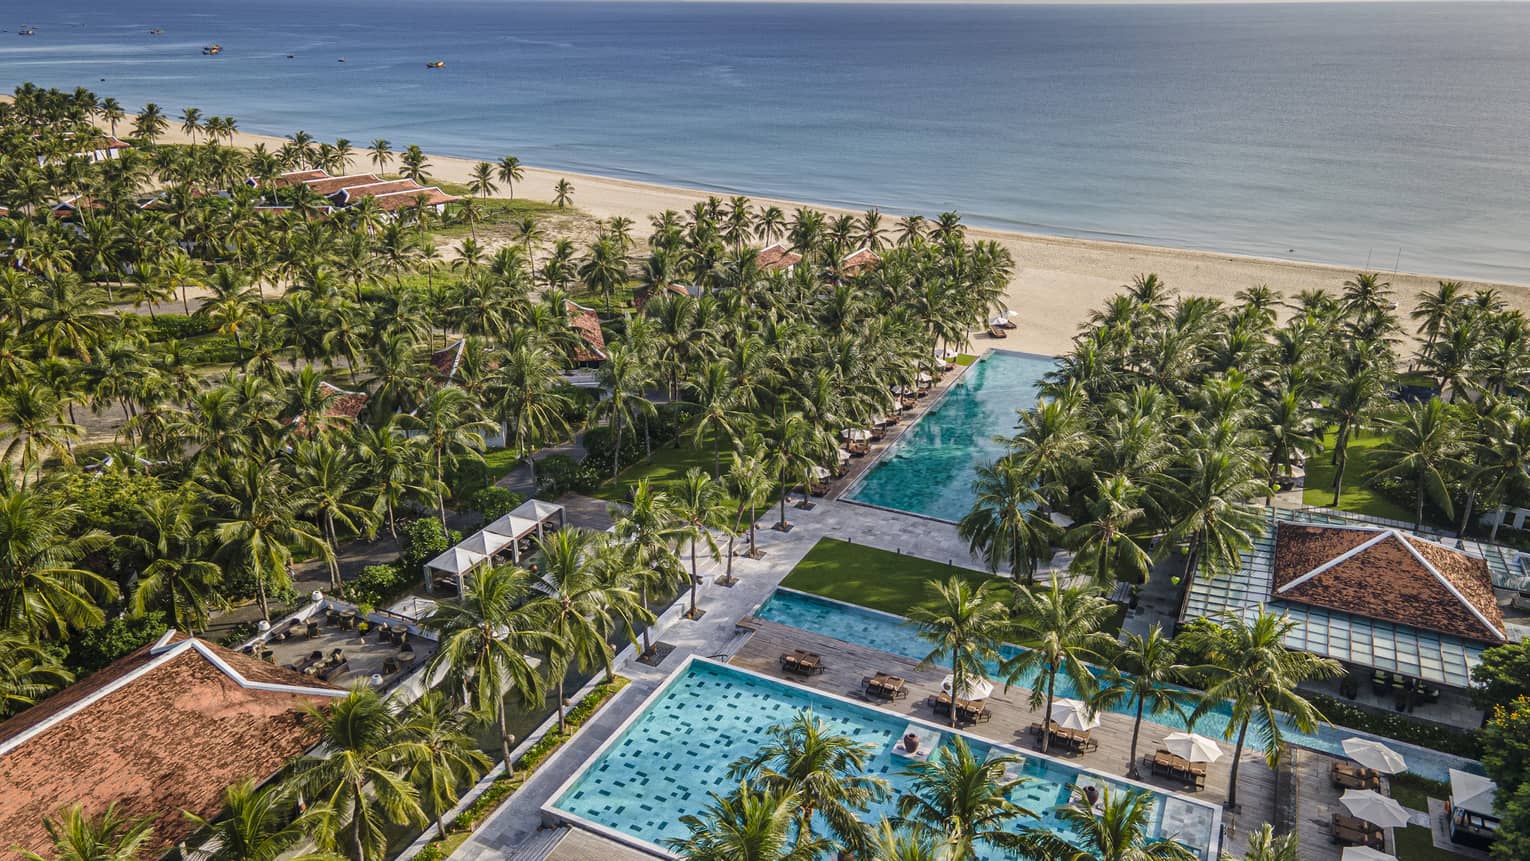 Aerial view of the resort pools with ocean views, palm trees and blue skies